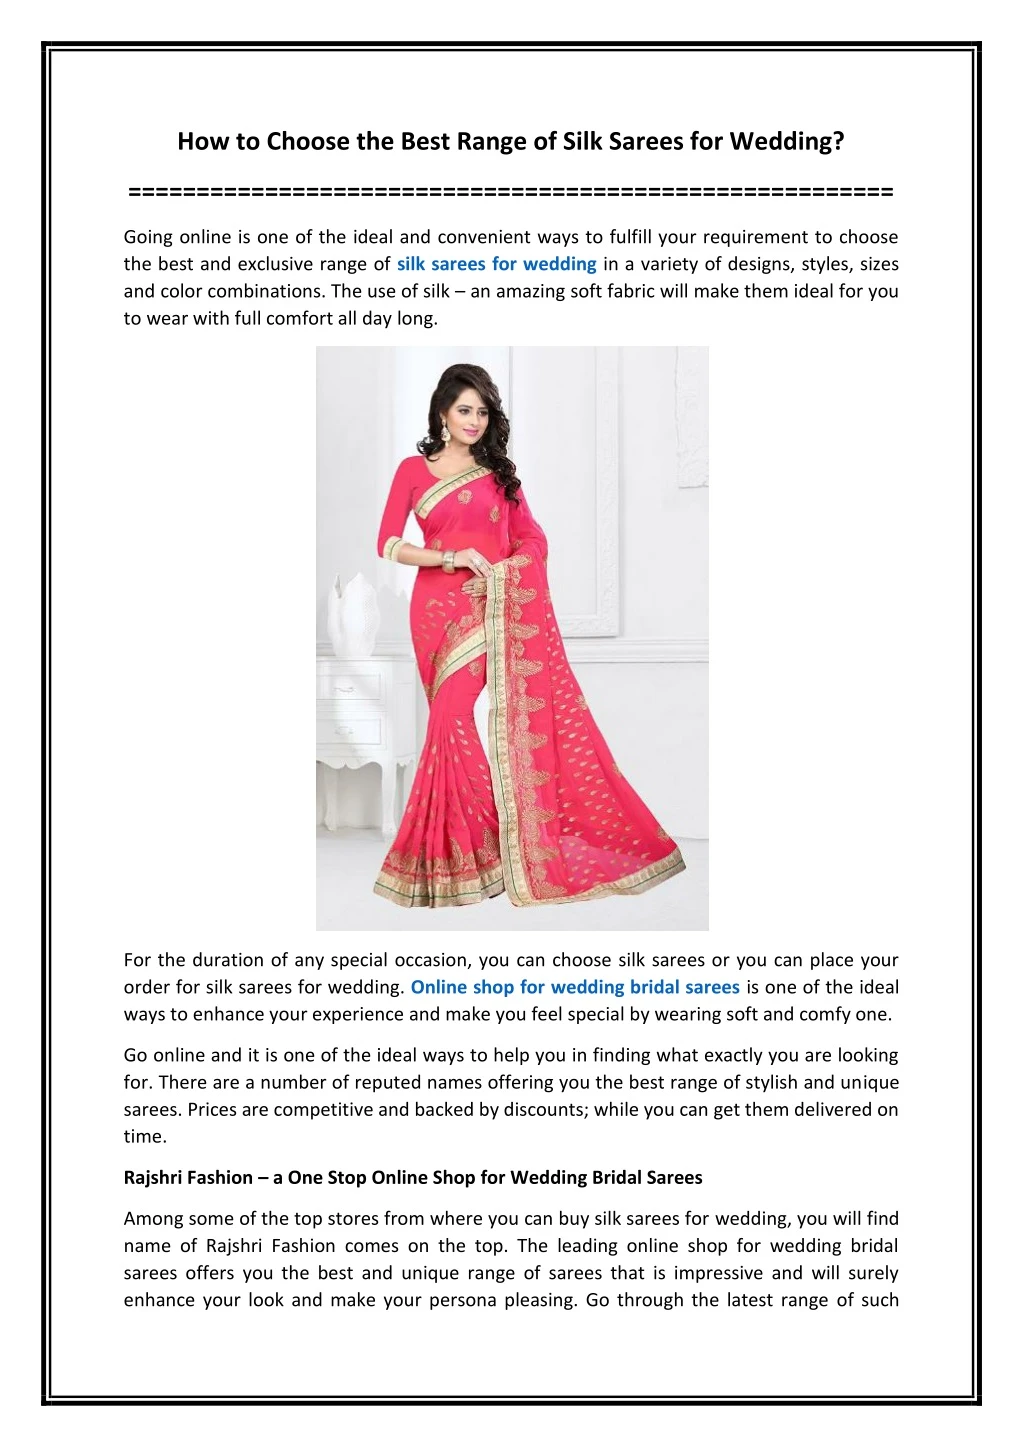 how to choose the best range of silk sarees